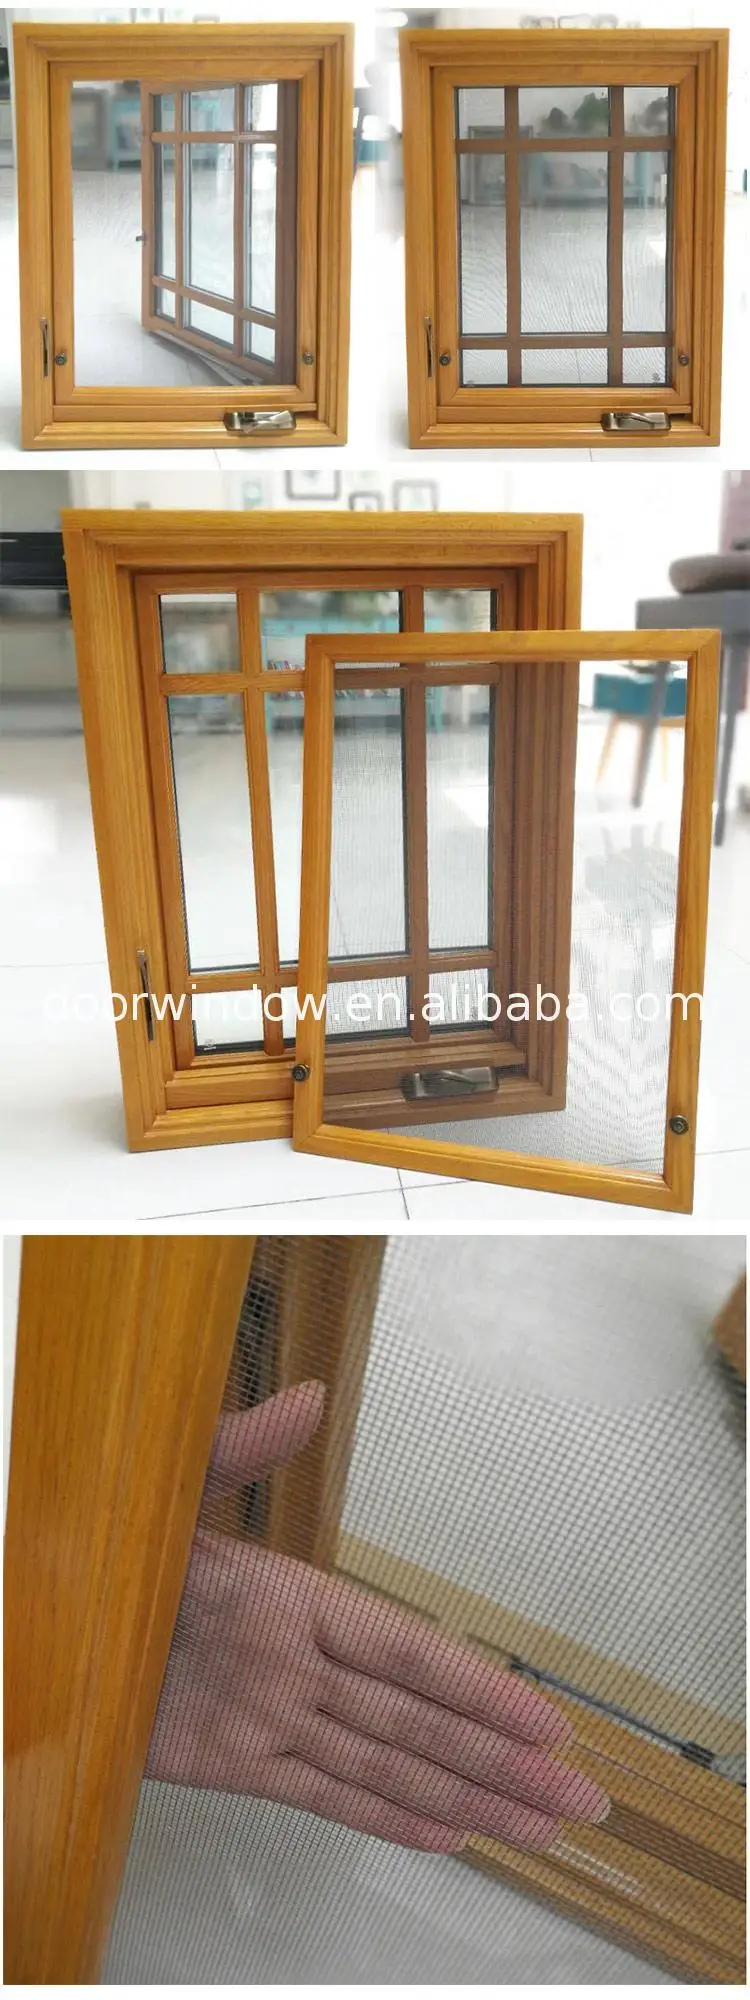 Boston chosen wood windows with china made american wooden style best paint for wooden window frames